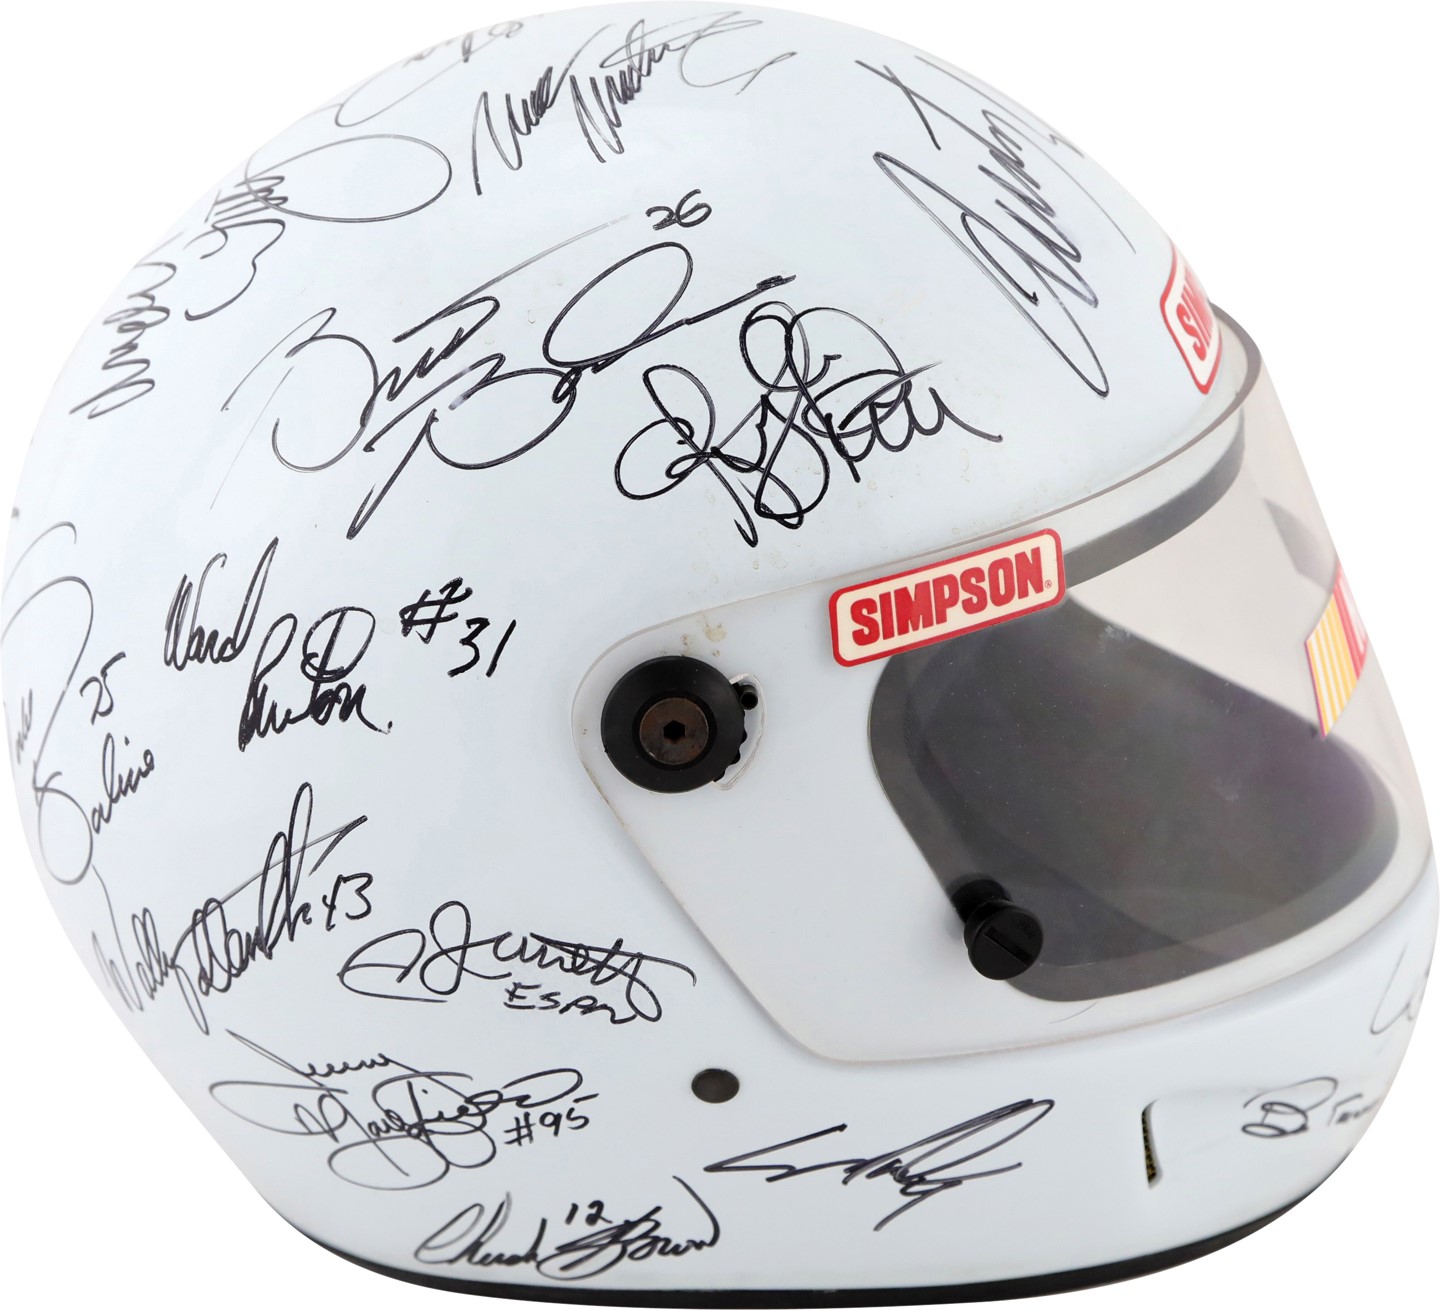 Olympics and All Sports - 1994 NASCAR Drivers Signed Helmet w/Dale Earnhardt